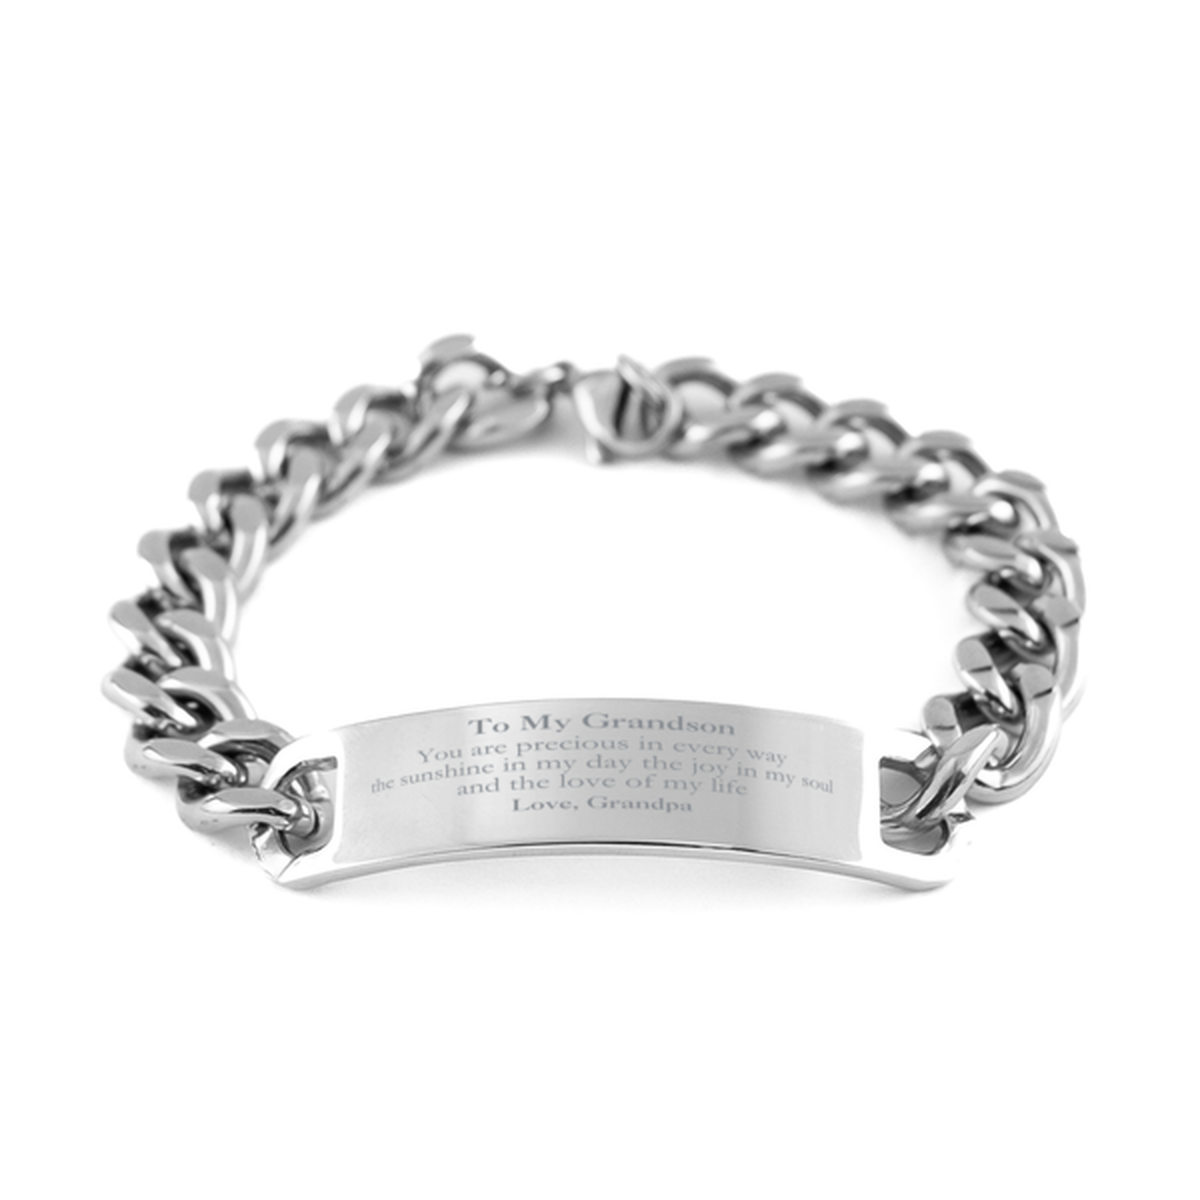 Graduation Gifts for Grandson Cuban Chain Stainless Steel Bracelet Present from Grandpa, Christmas Grandson Birthday Gifts Grandson You are precious in every way the sunshine in my day. Love, Grandpa